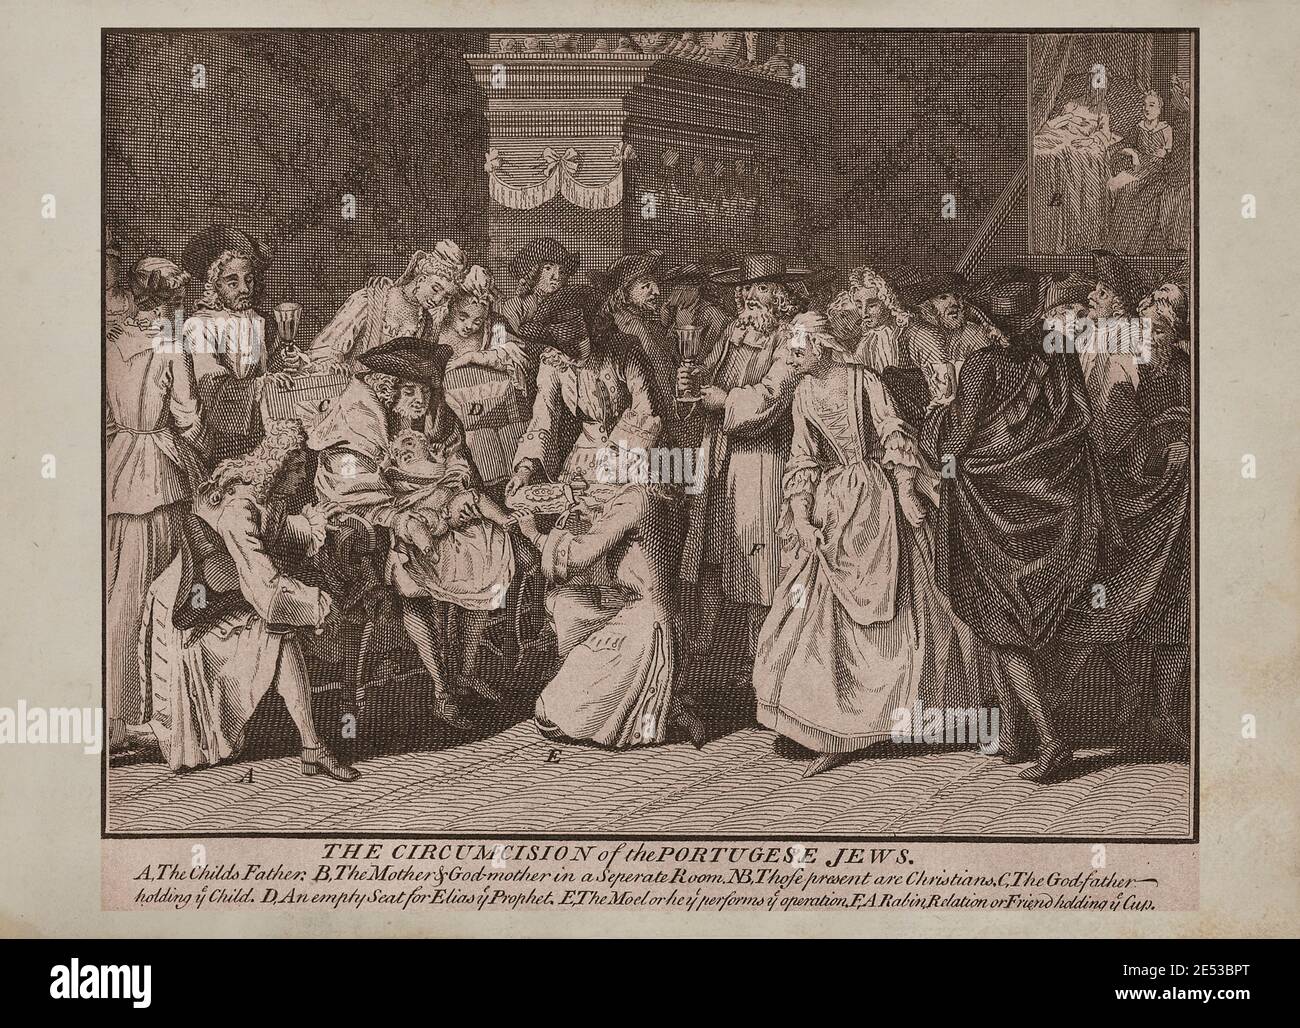 The circumcision of the portugese jews. A. The childs father. B. The mother and God-mother in a separate room. NB. Those present are Christians. C. Th Stock Photo